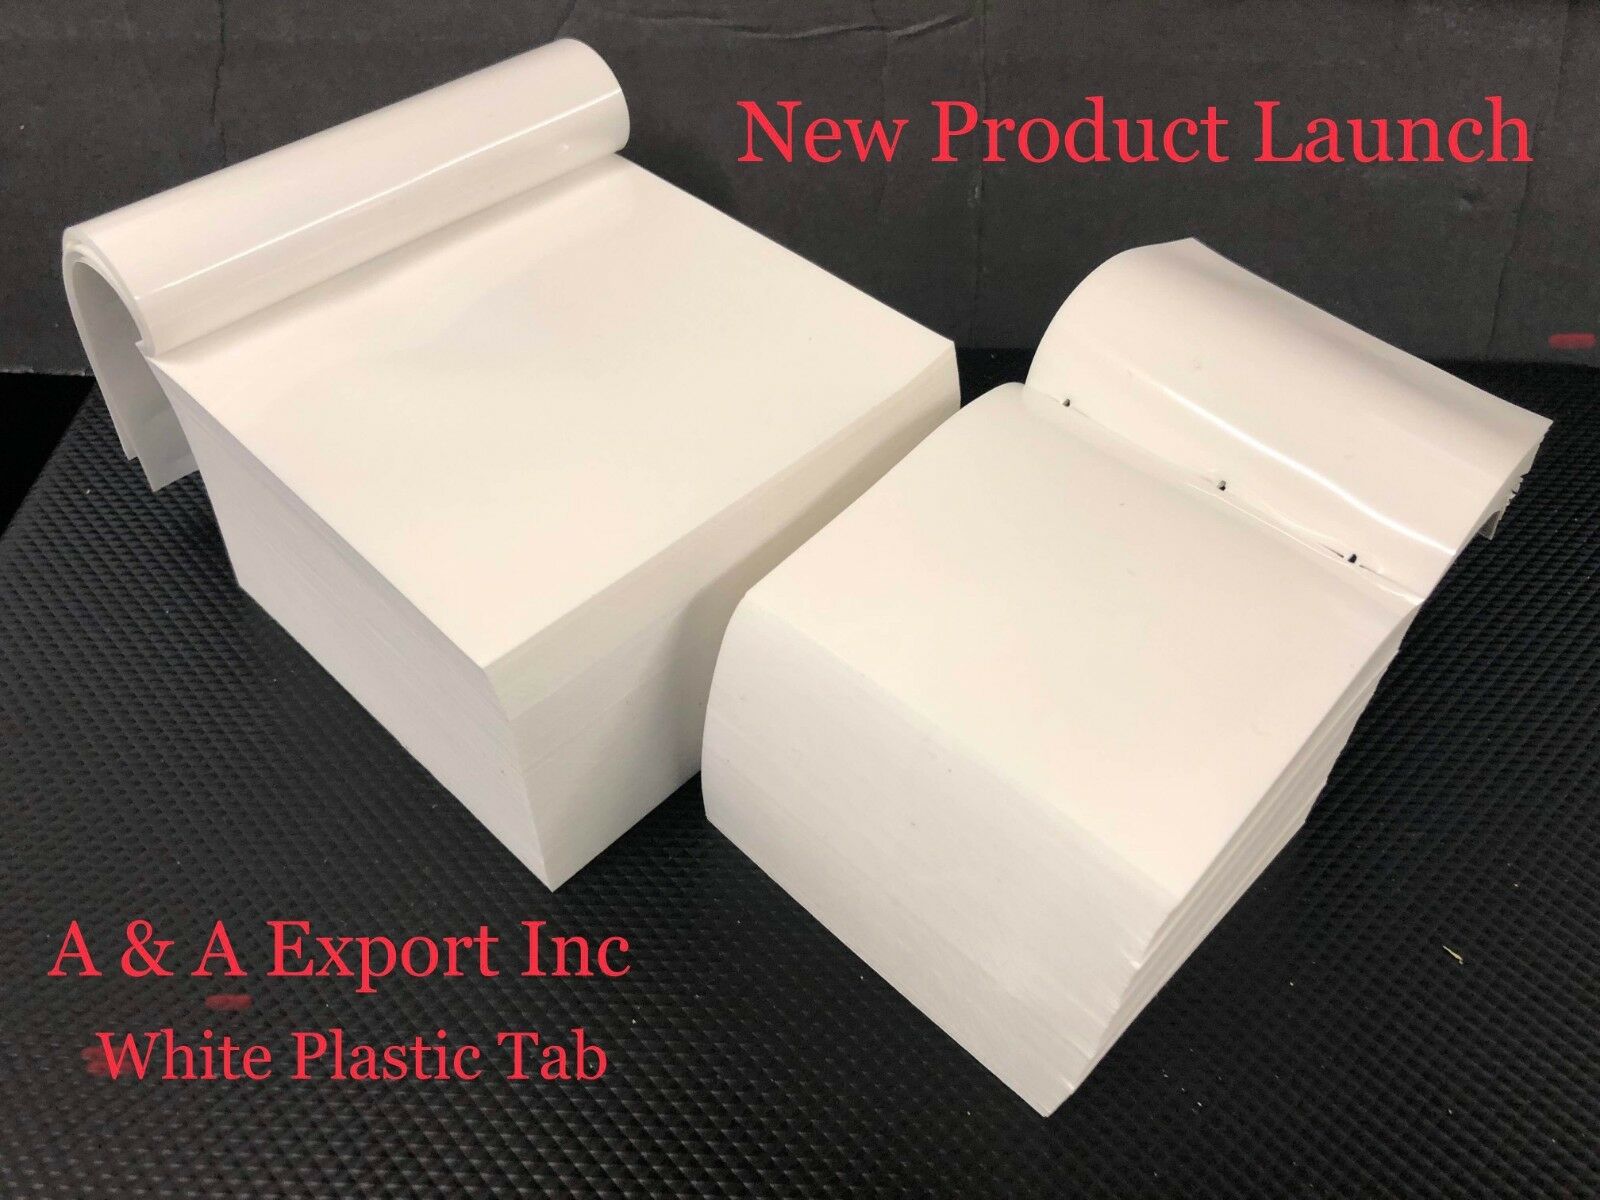 Free Shipping - On Sale Now - 3x3 White Plastic Tabs 1,000 cts - A&A Export Inc